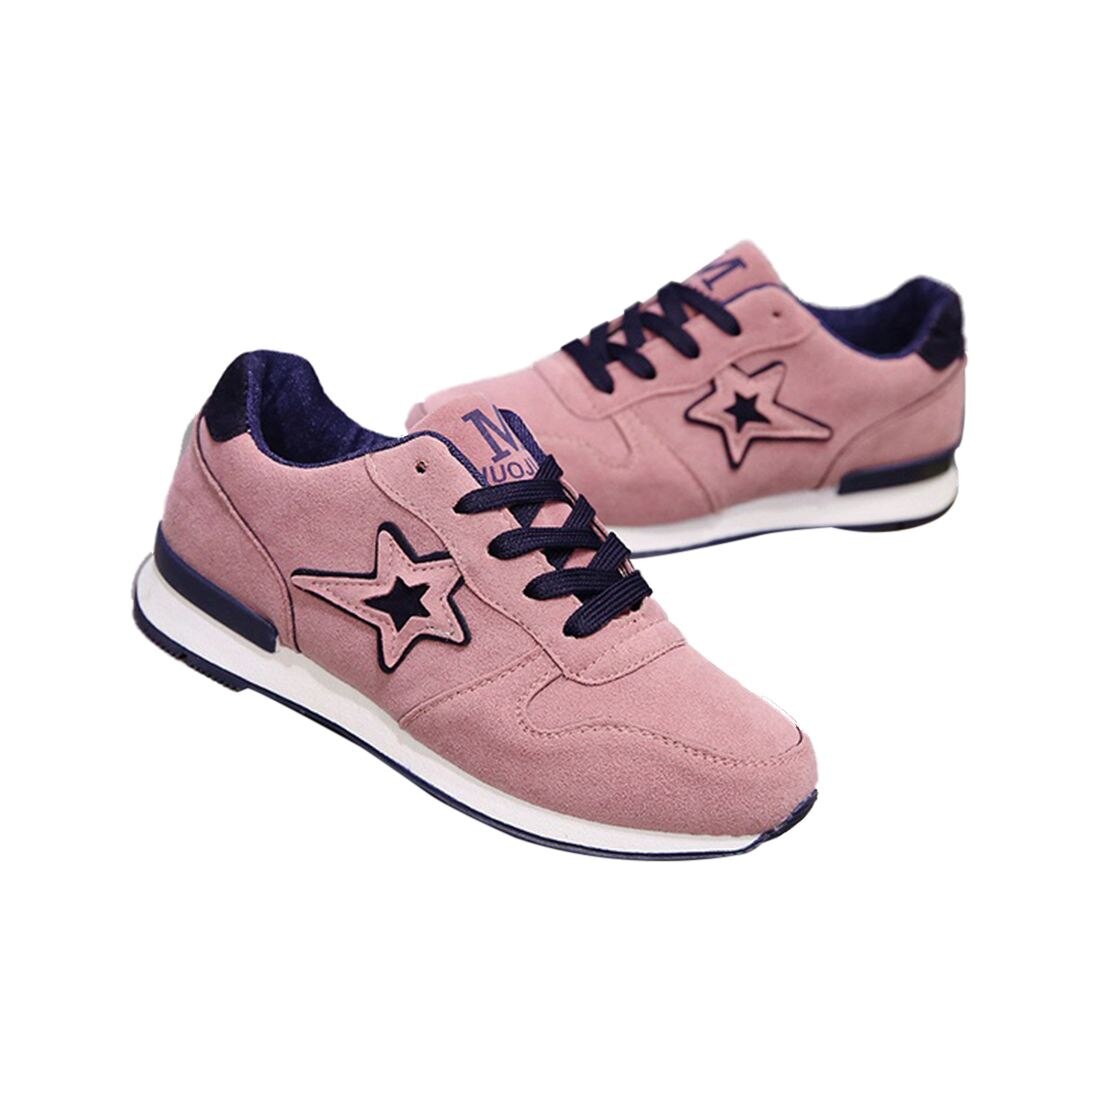 1 pairs of sports shoes five-pointed star student non-slip running shoes breathable leisure travel shoes hiking shoes - ebowsos